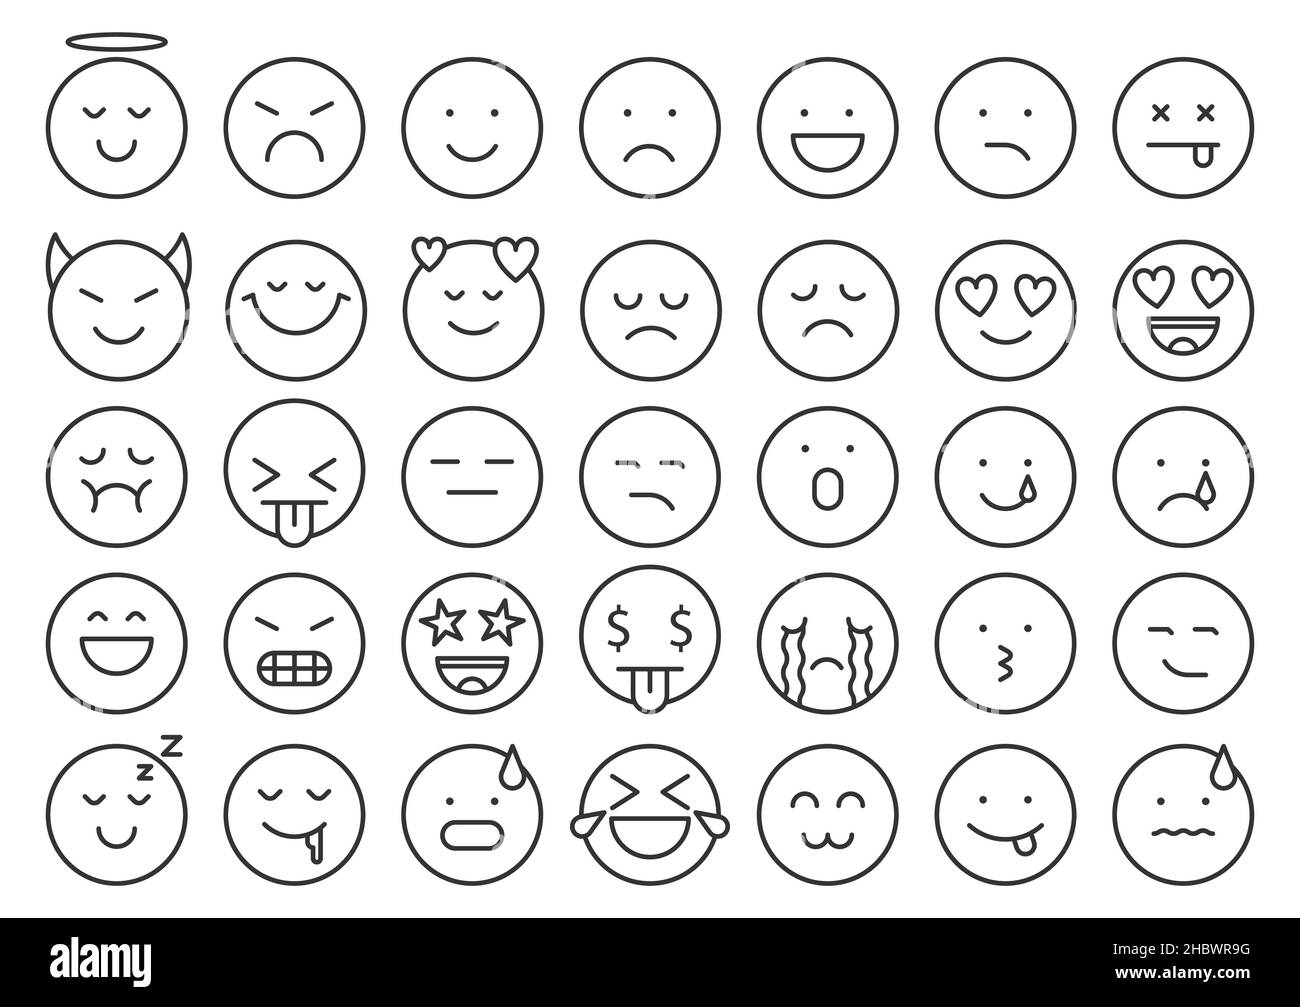 Emoji face icon simple black line set. Different emotion icon communication in the social network messenger website. Expression sadness joy anger cute minimal shape chat sticker isolated on white Stock Vector